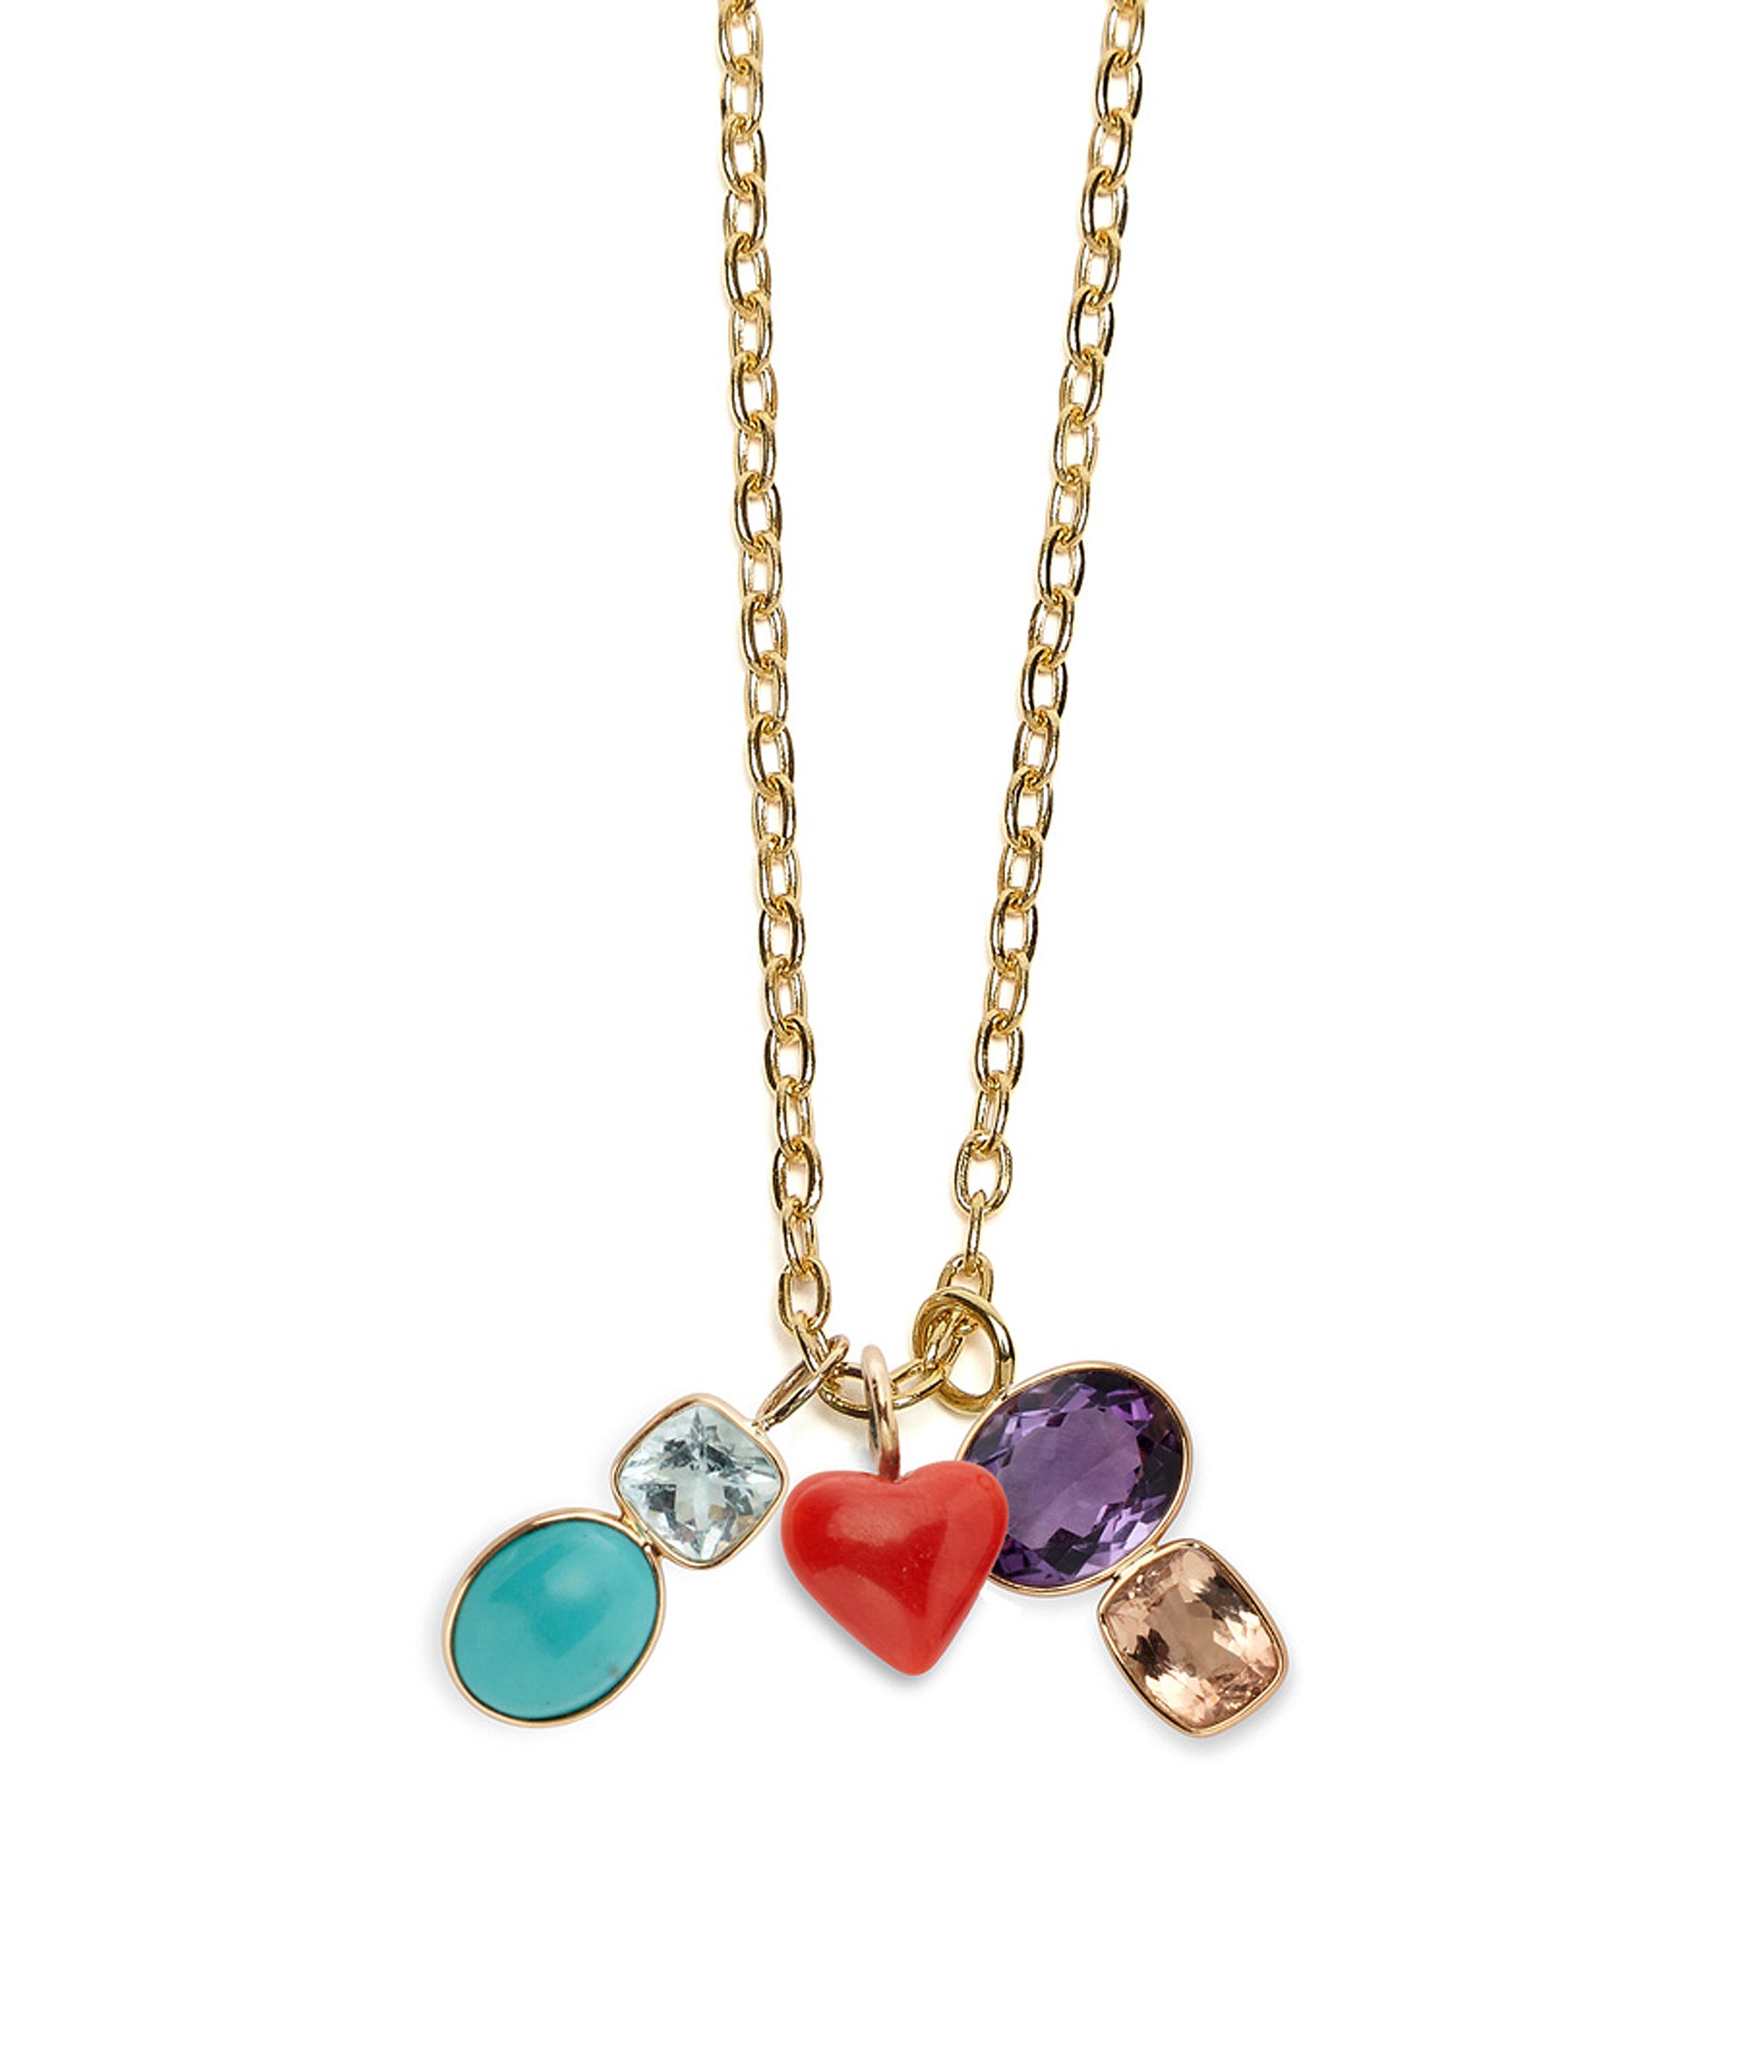 Close-up of Puffy Coral Heart 14K Necklace Charm with other fine charms on gold chain.